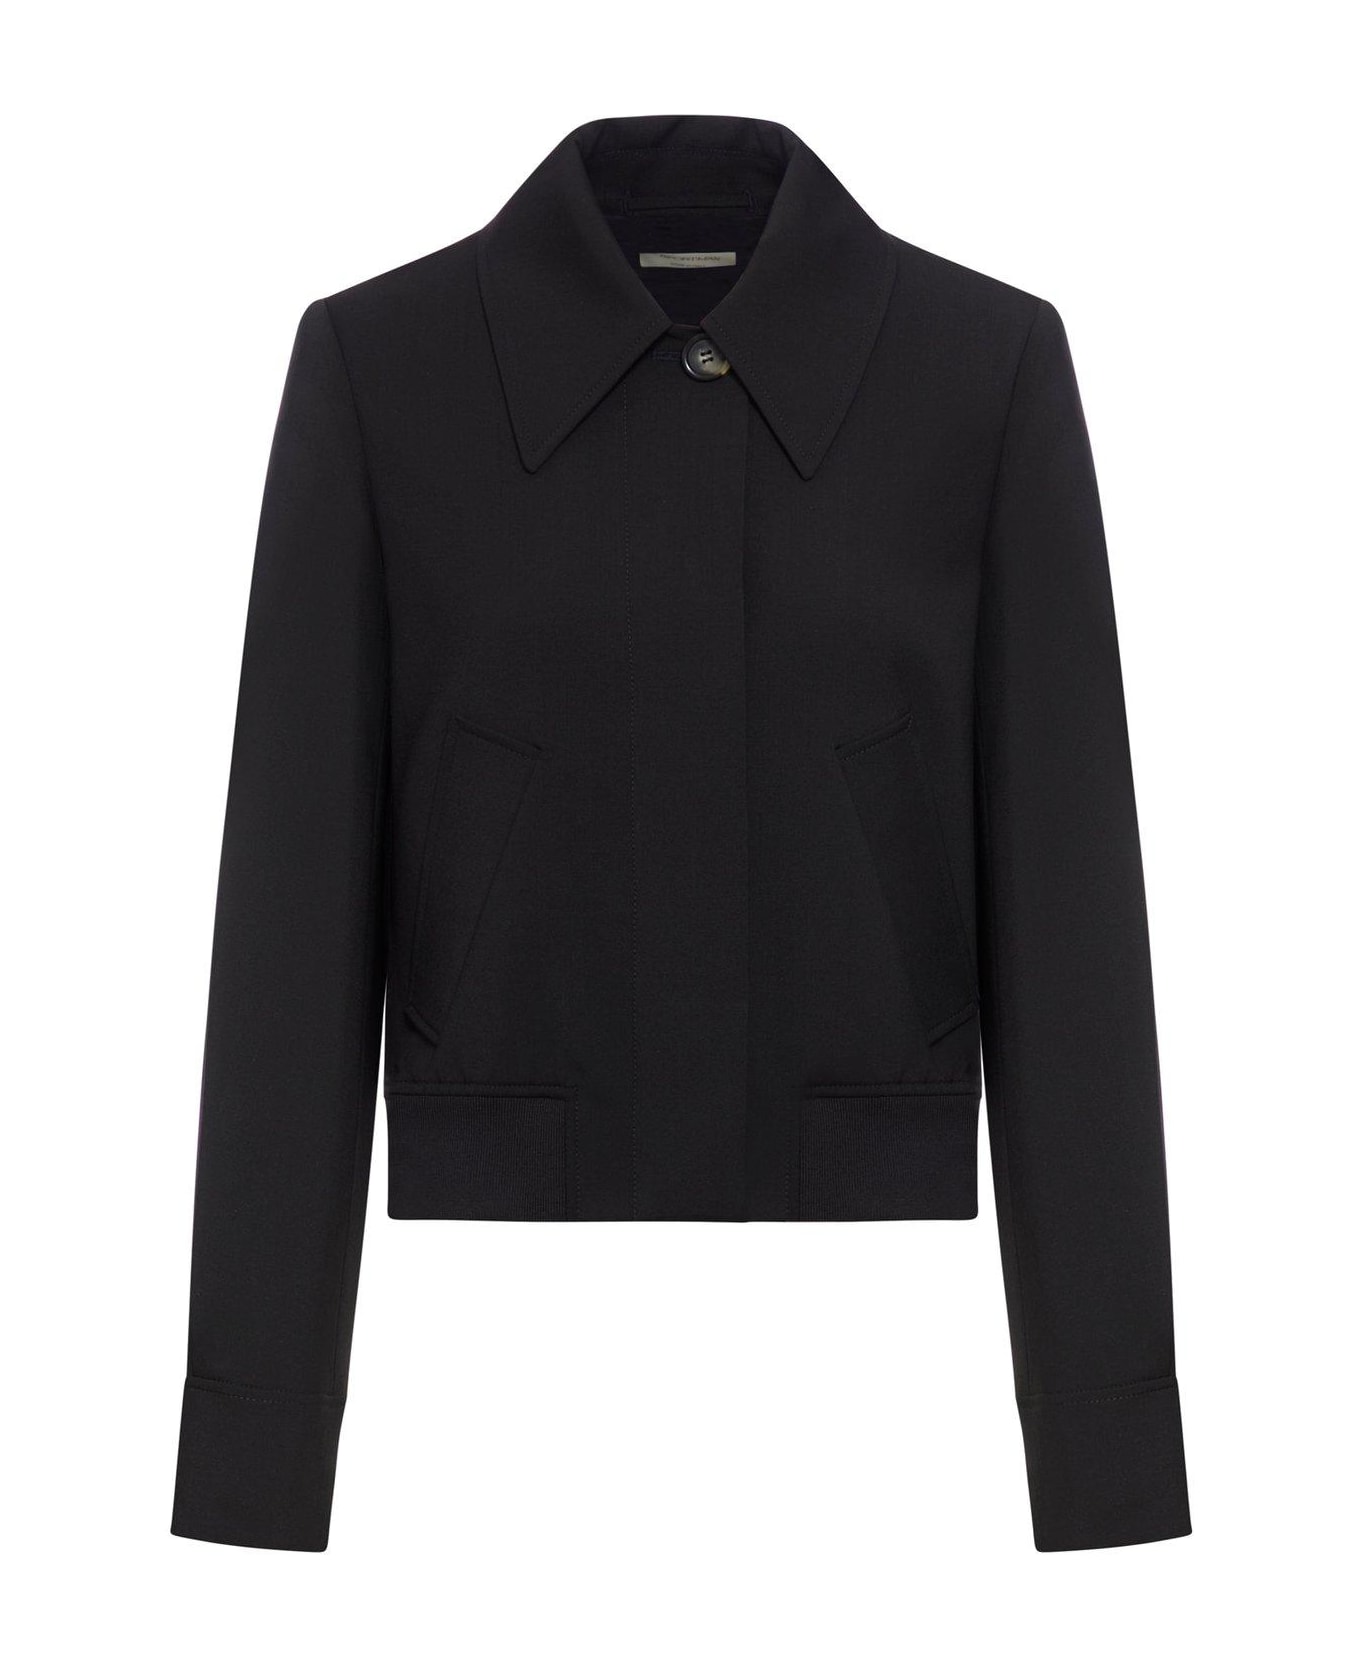 SportMax Button Detailed Long-sleeved Jacket